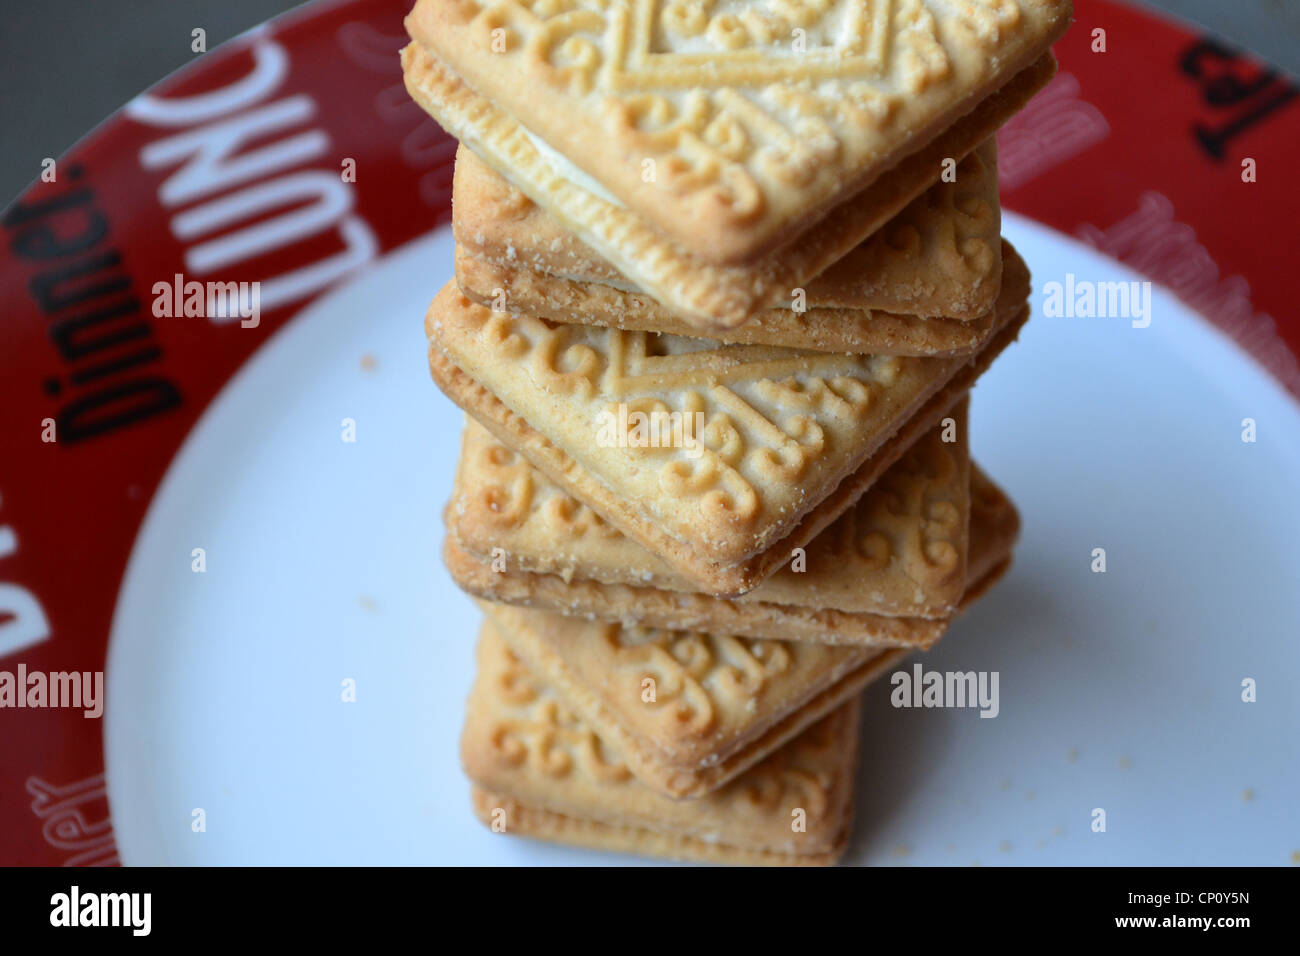 Biscuit Tower. Stock Photo